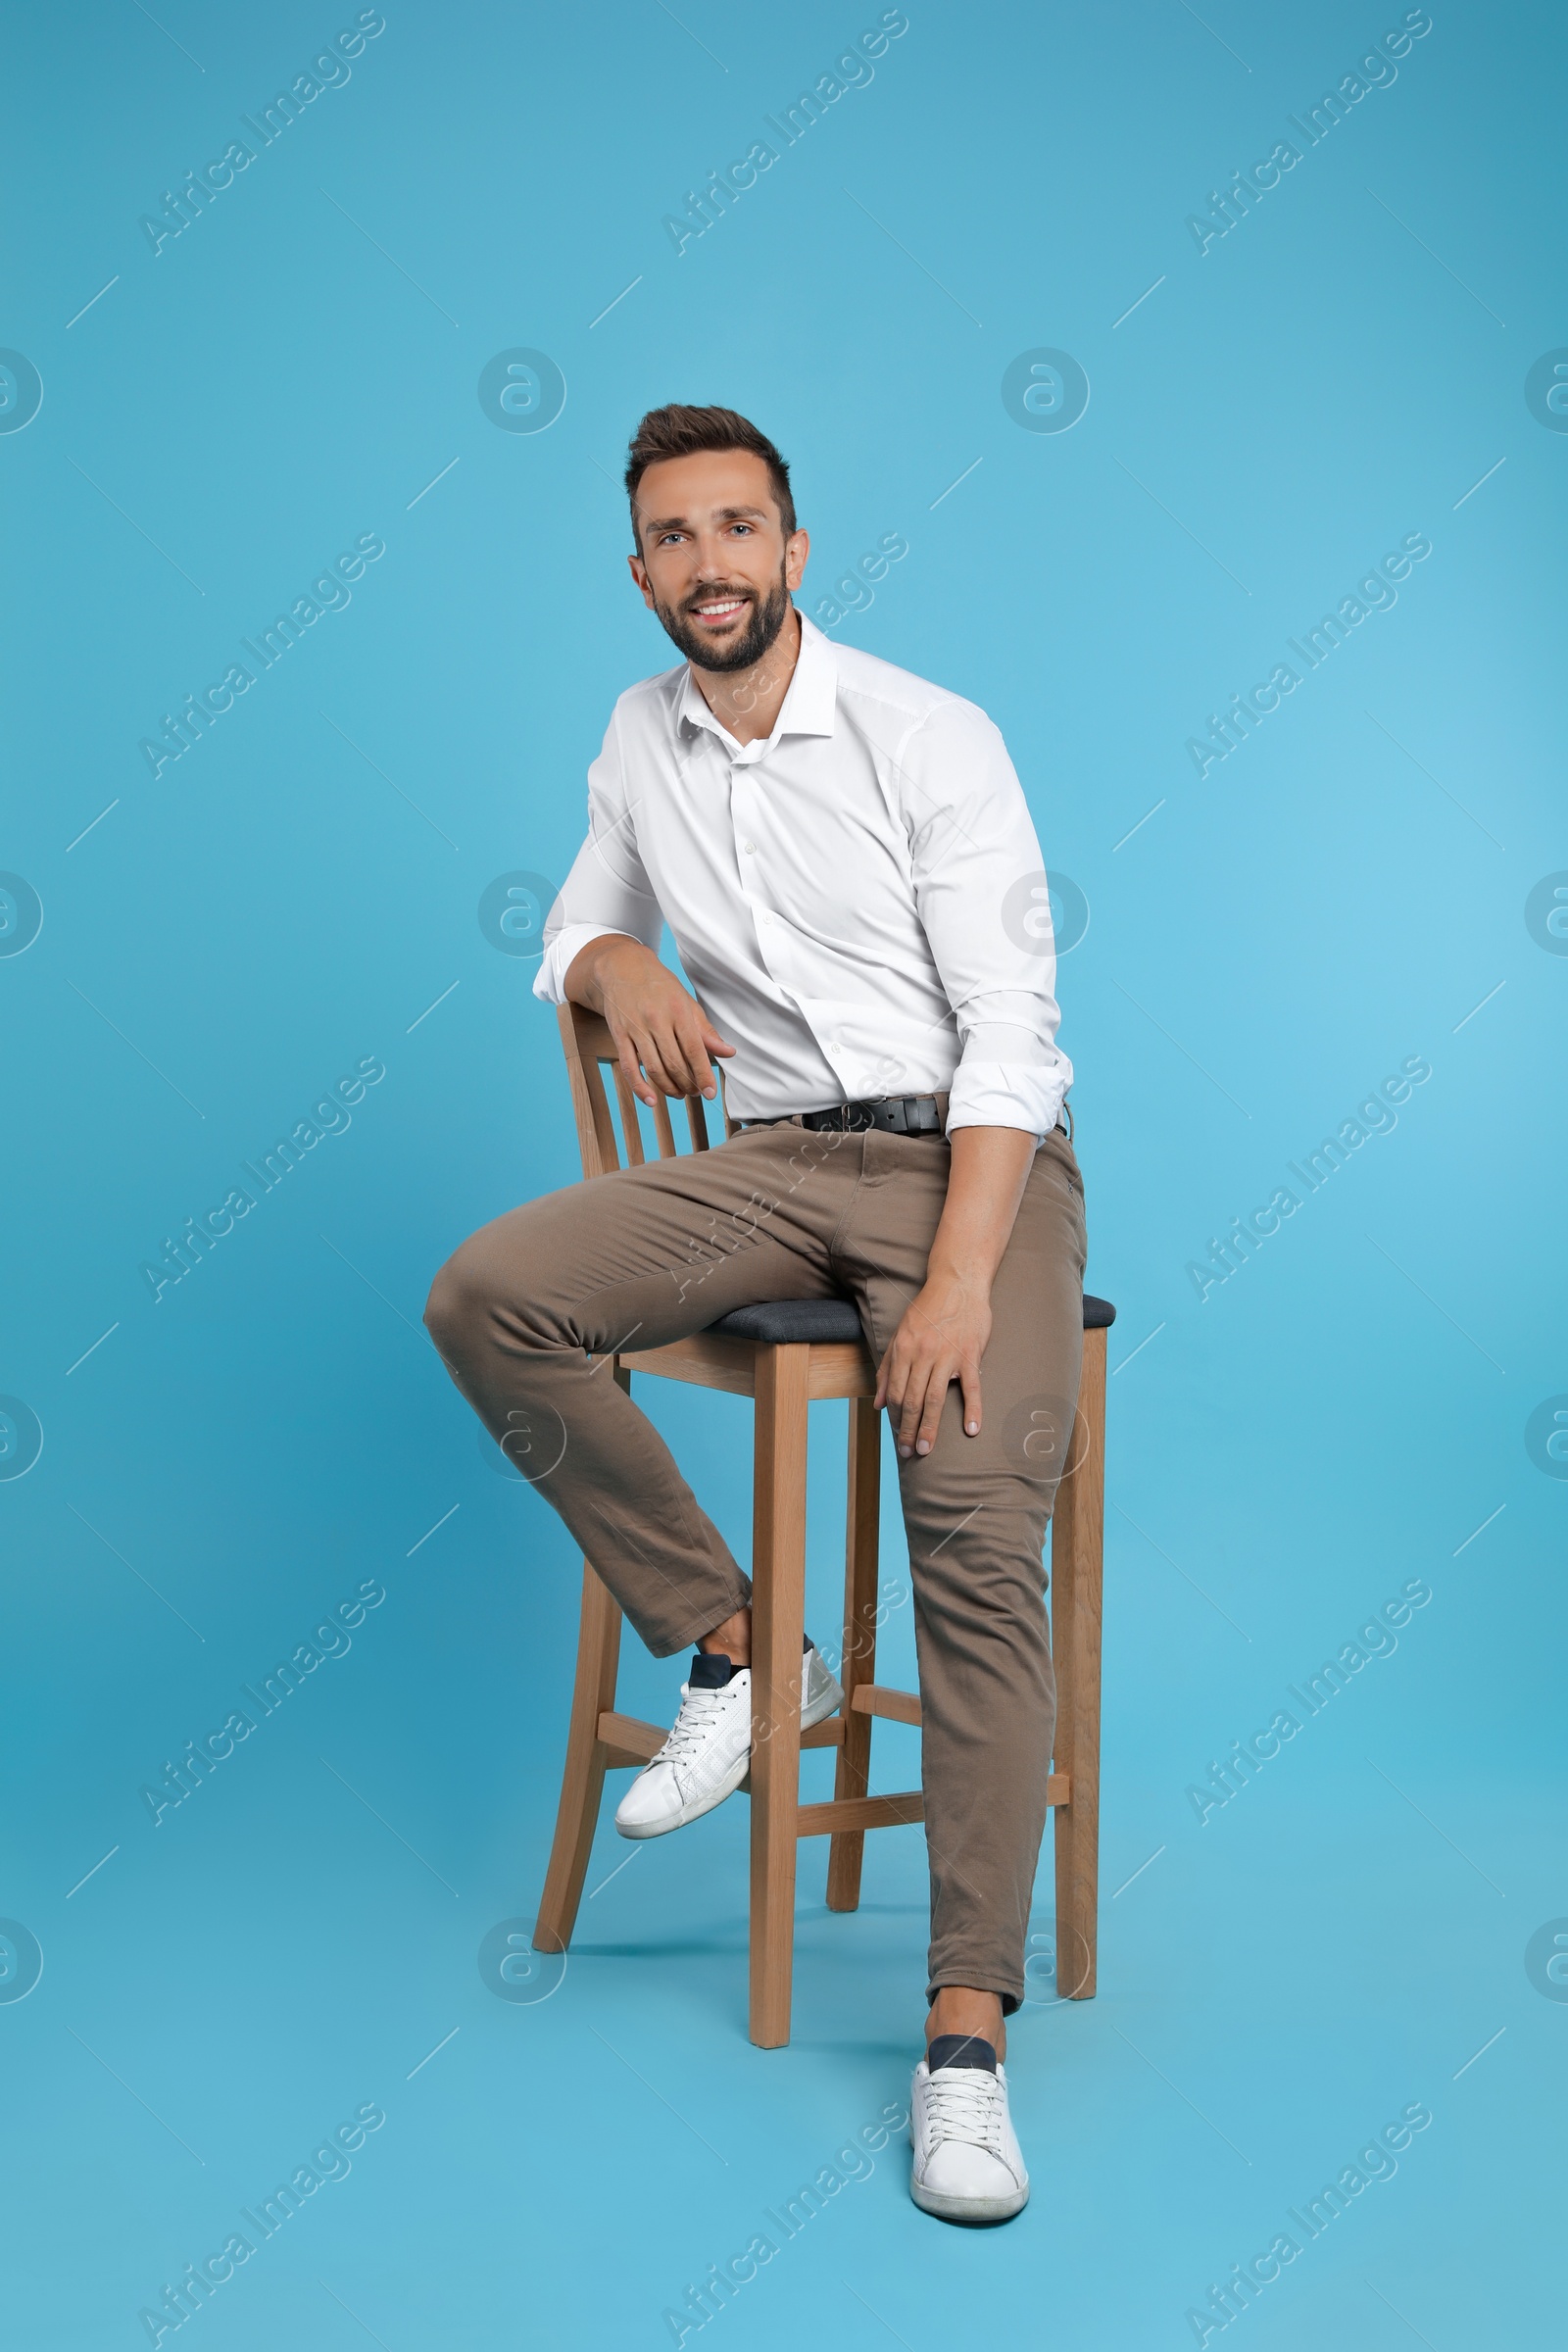 Photo of Handsome man sitting on stool against turquoise background